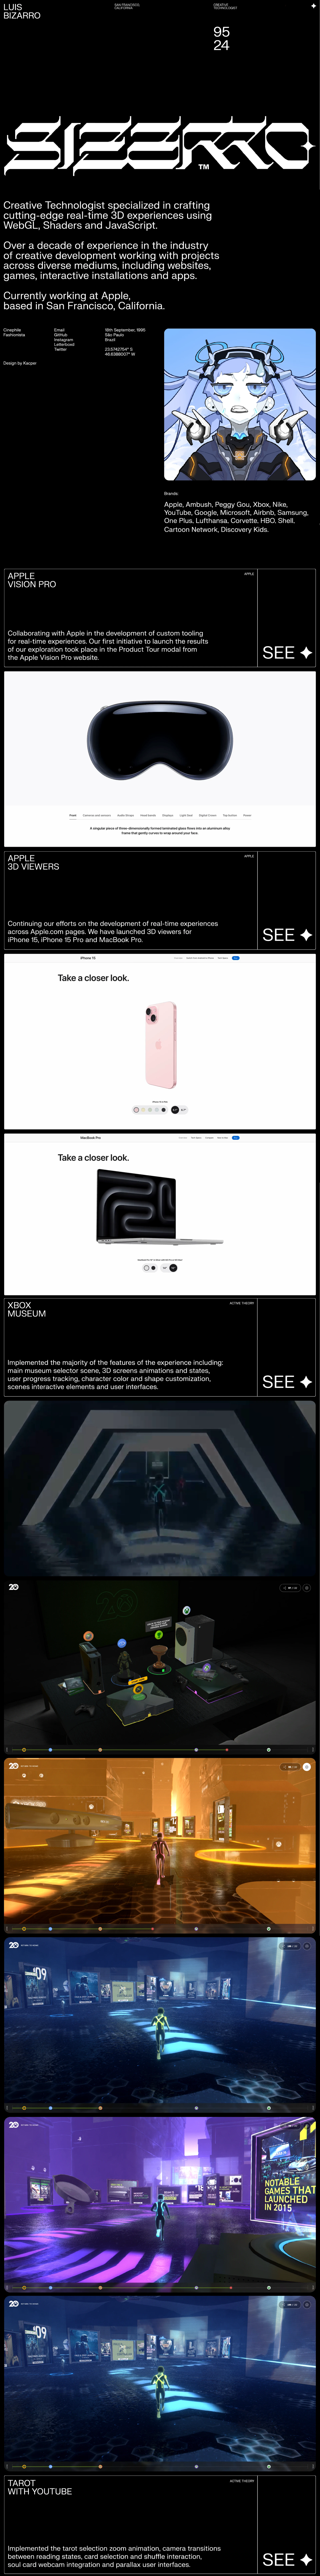 Luis Bizarro Landing Page Example: Senior Creative Technologist at  Apple with focus on real-time 3D experiences using WebGL. Awwwards Independent of The Year 2021.